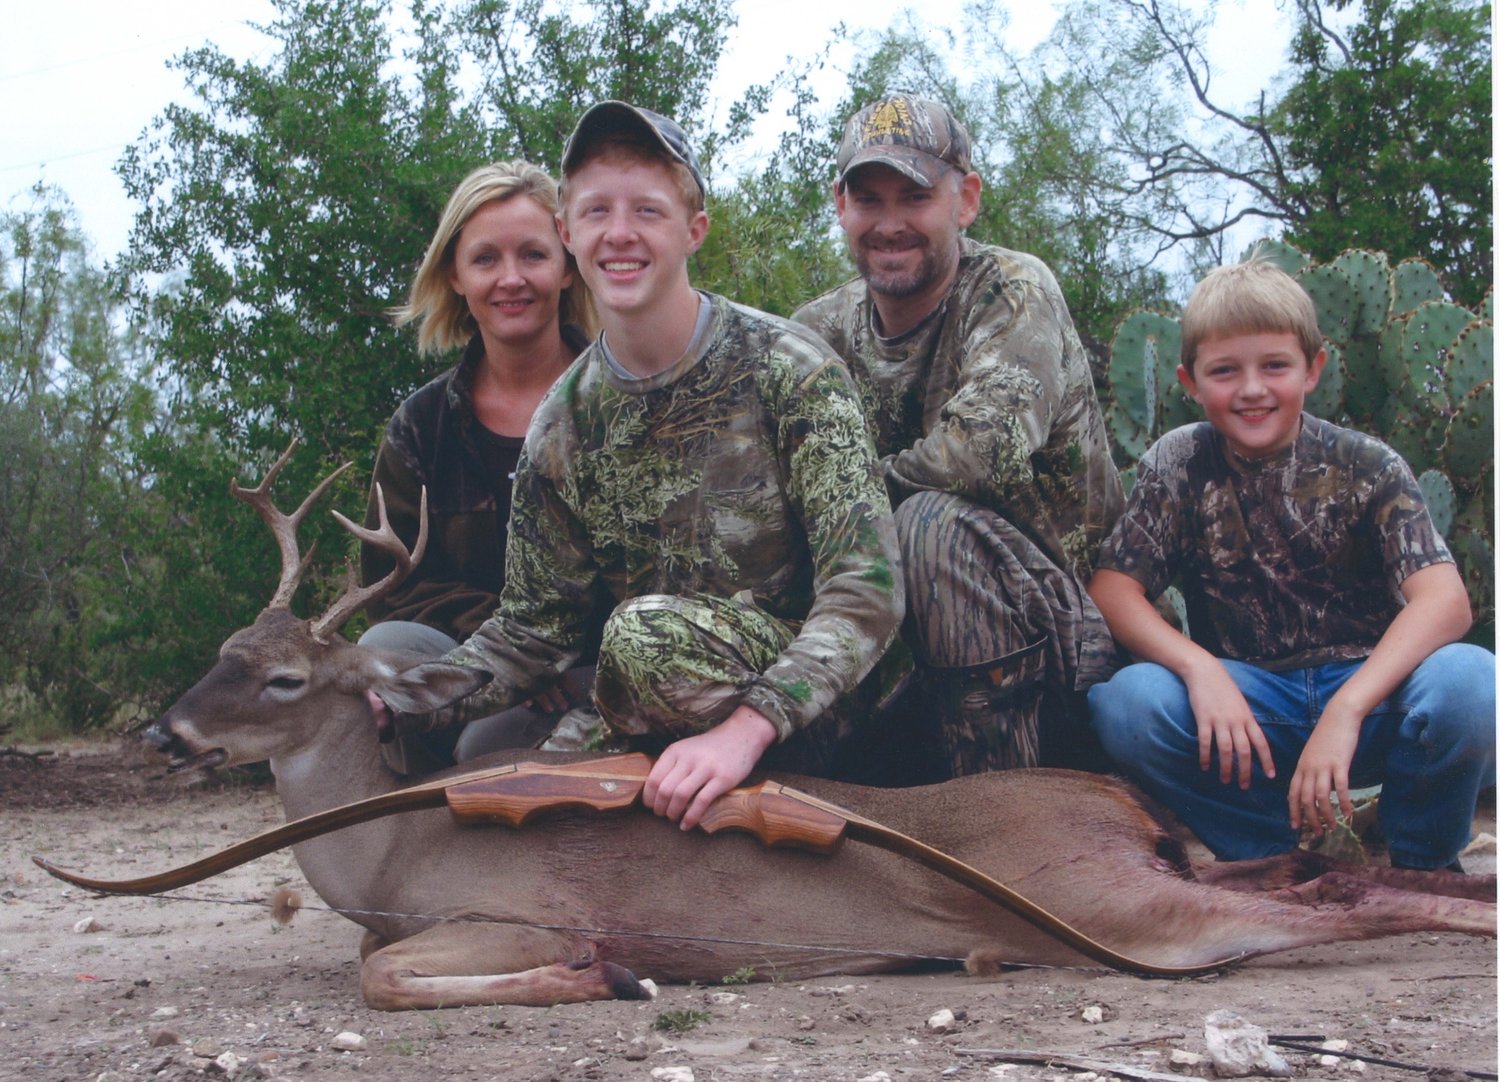 Dalton Patrick Rosser (center) was an avid outdoorsman. Here he poses with his family after harvesting a deer with his Palmer recurve bow at First Point Bowhunting Ranch.